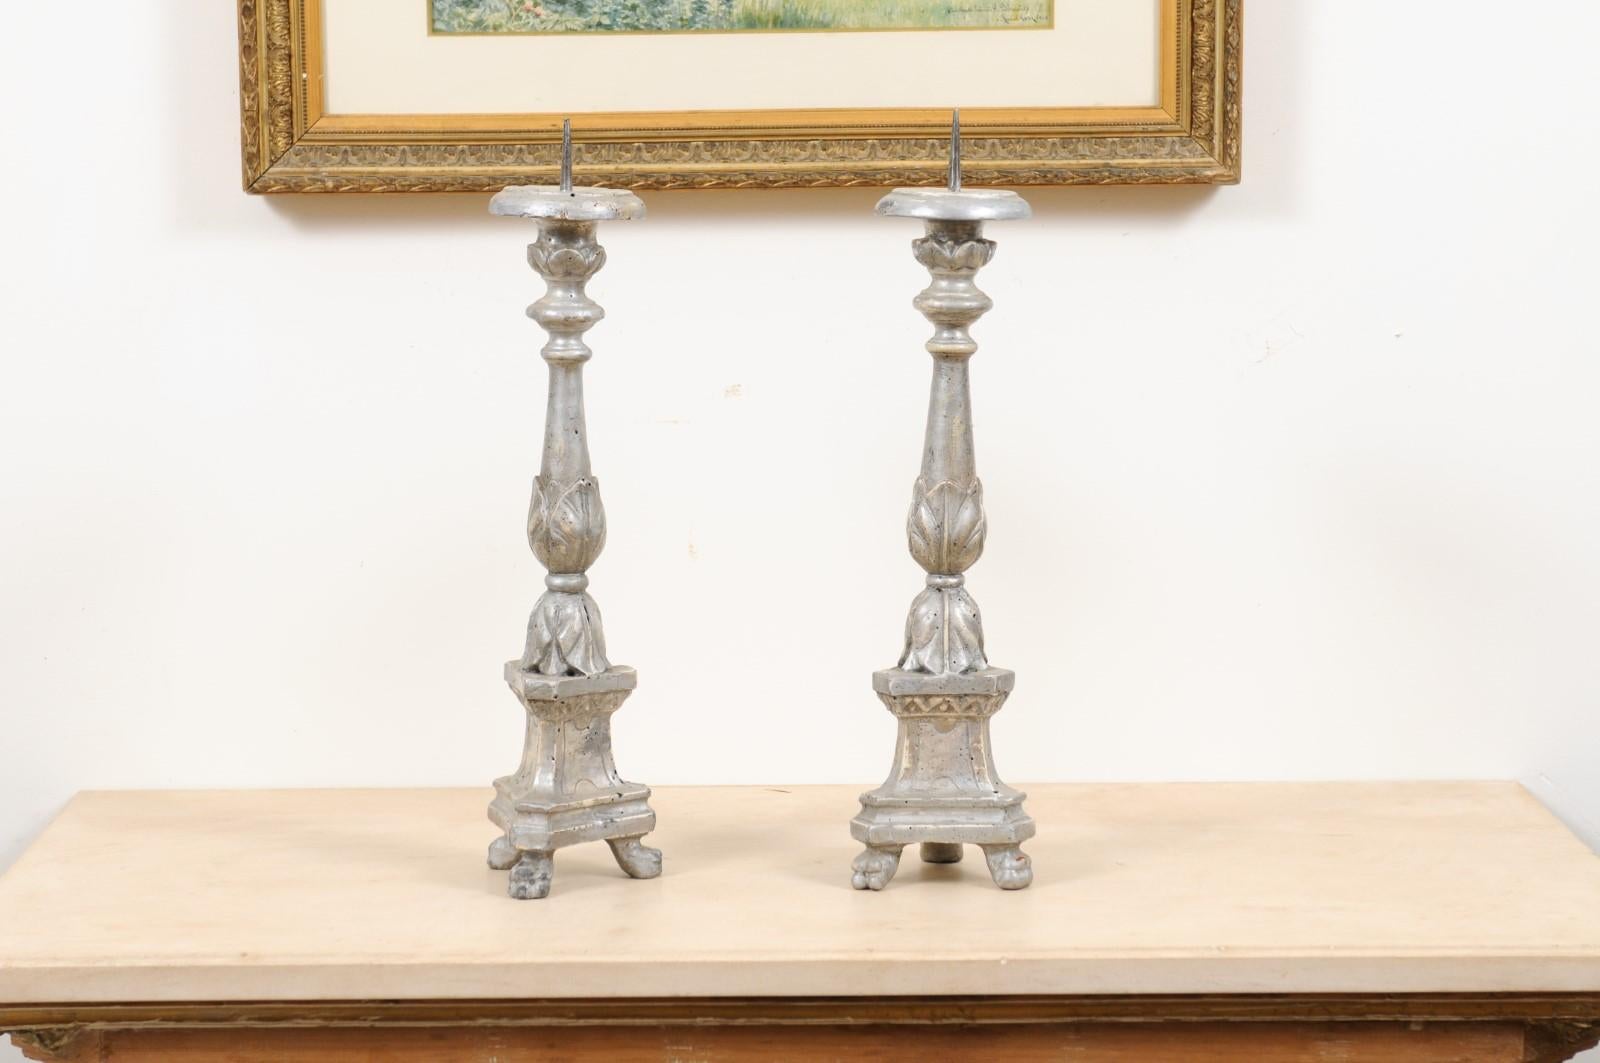 A pair of Italian silver gilt candlesticks from the mid-19th century, with carved waterleaves and paw feet. Created in Italy during the 1850s, each of this pair of silver gilt candlesticks is carved with delicate waterleaves and is resting on a